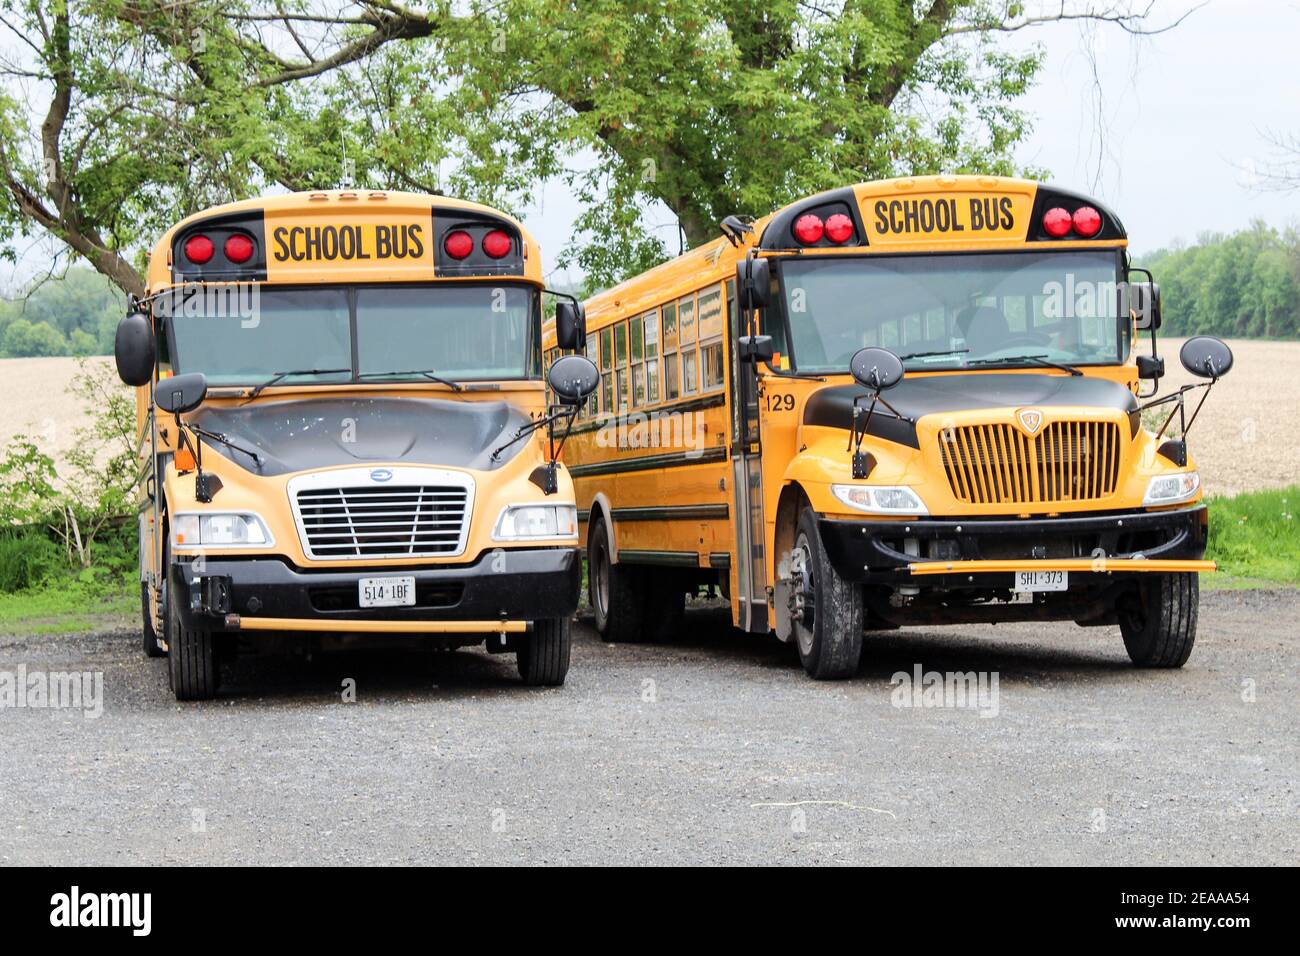 Canadian School Buses, Ontario Province, Canada Stock Photo